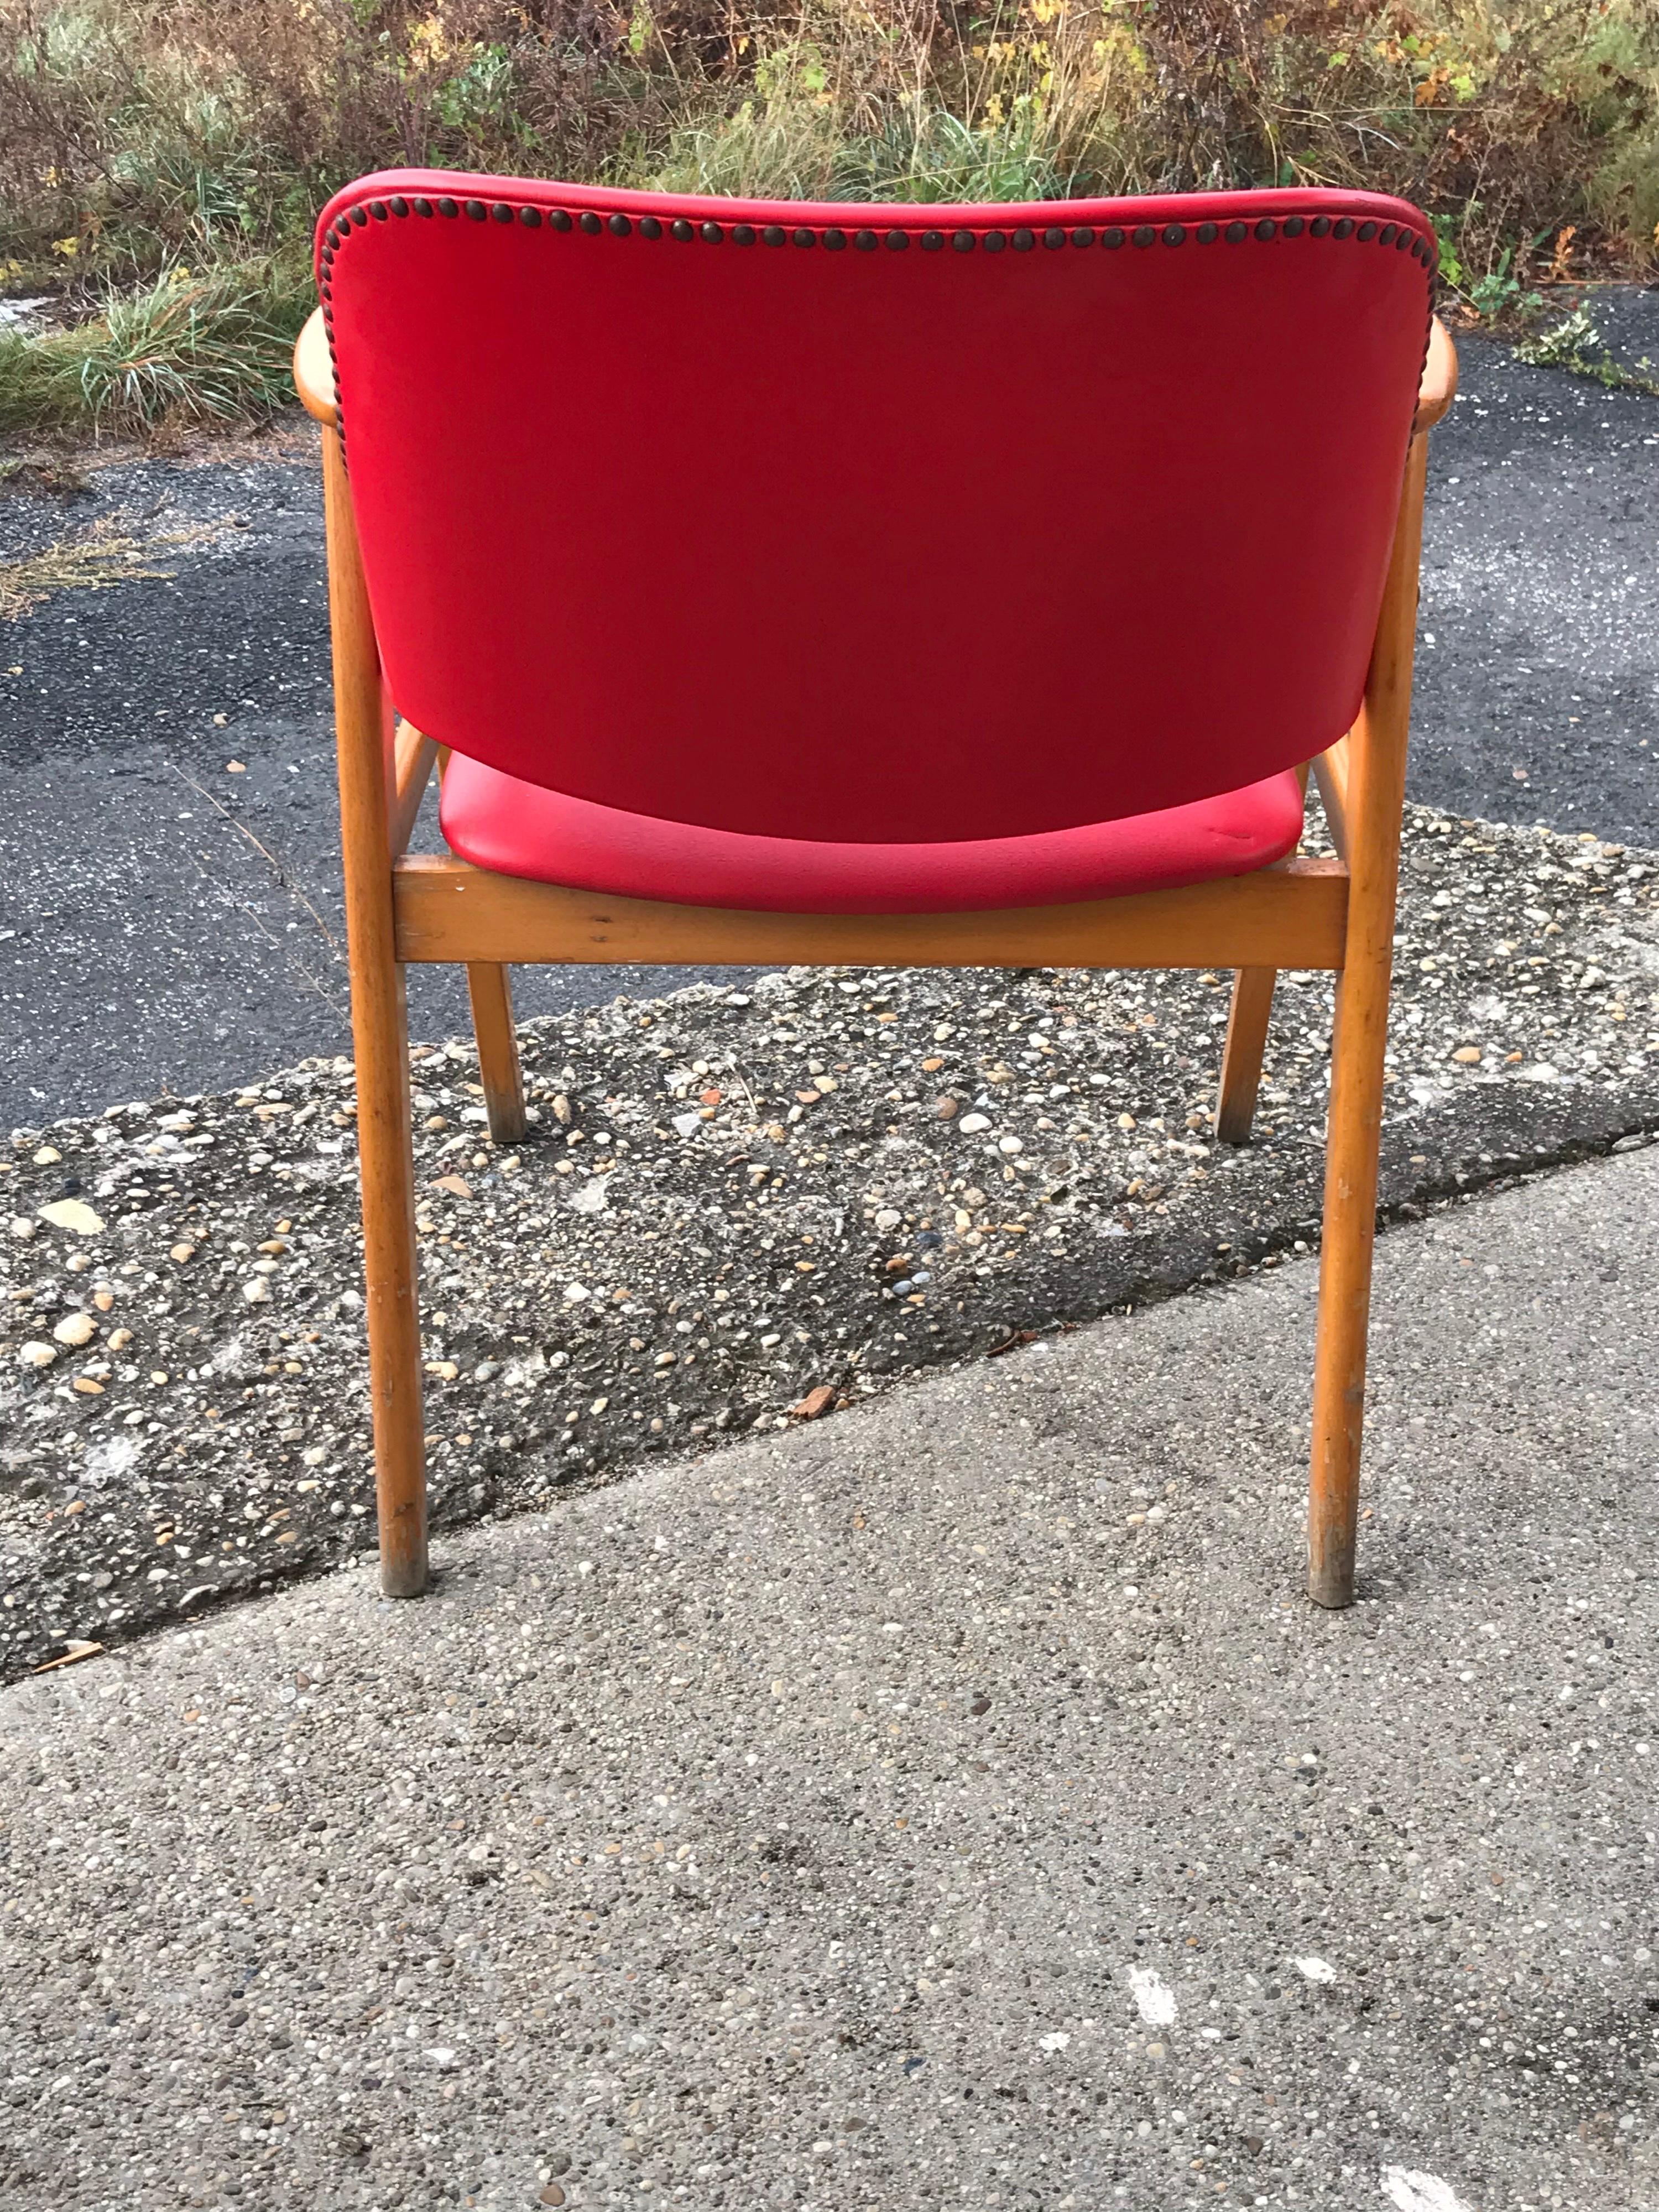 Mid-Century Modern Midcentury Hungarian Chair with Red Faux Leather, circa 1960s For Sale